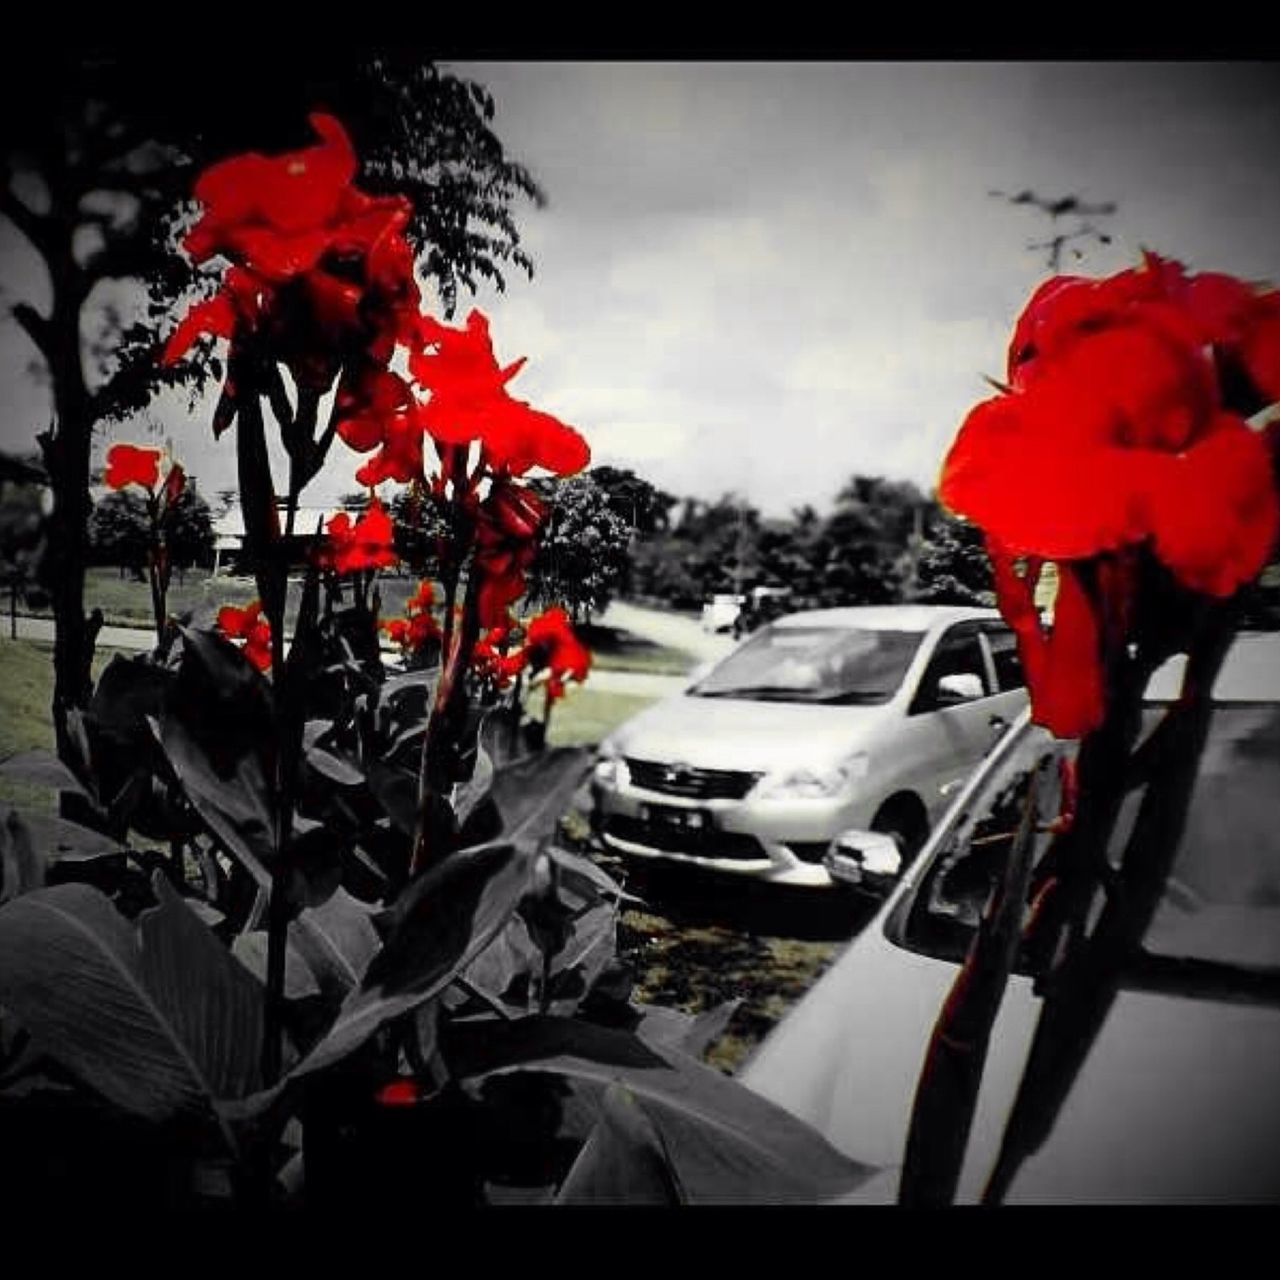 flower, red, transfer print, auto post production filter, land vehicle, car, plant, transportation, petal, mode of transport, nature, fragility, growth, beauty in nature, sky, day, outdoors, no people, high angle view, blooming